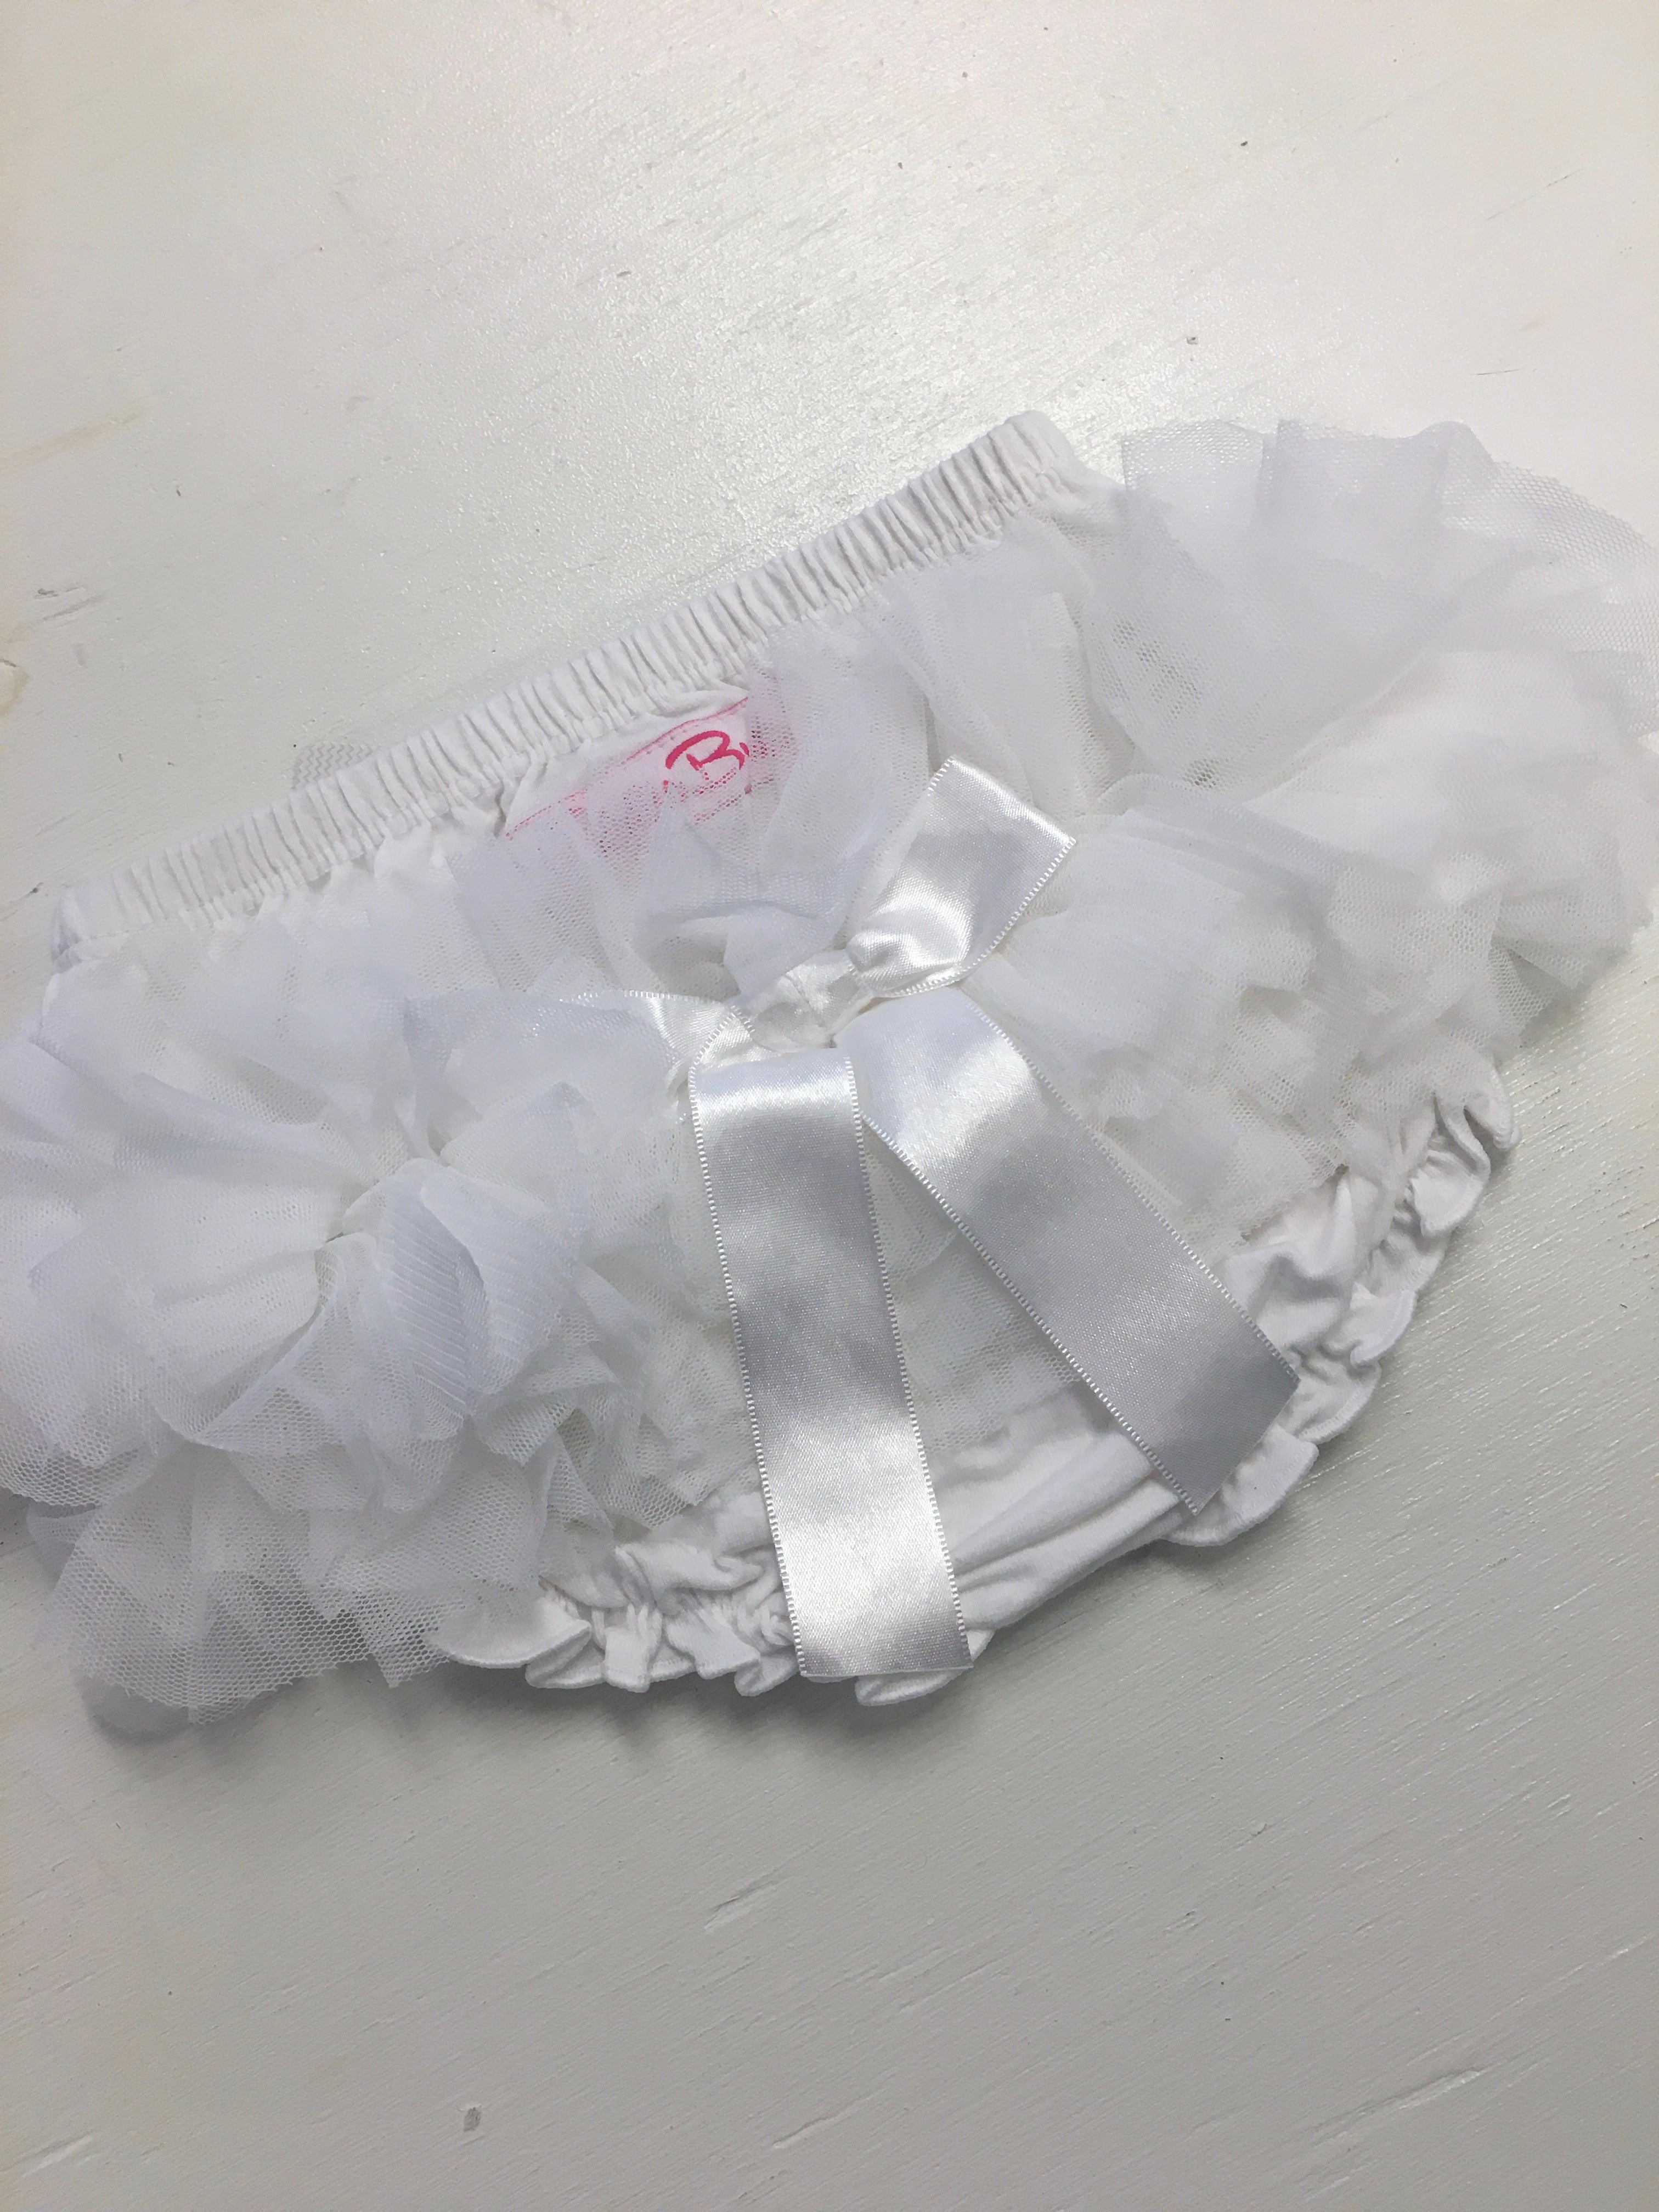 Baby Girls White Diamante Bow Frilly Lace Knickers Pants